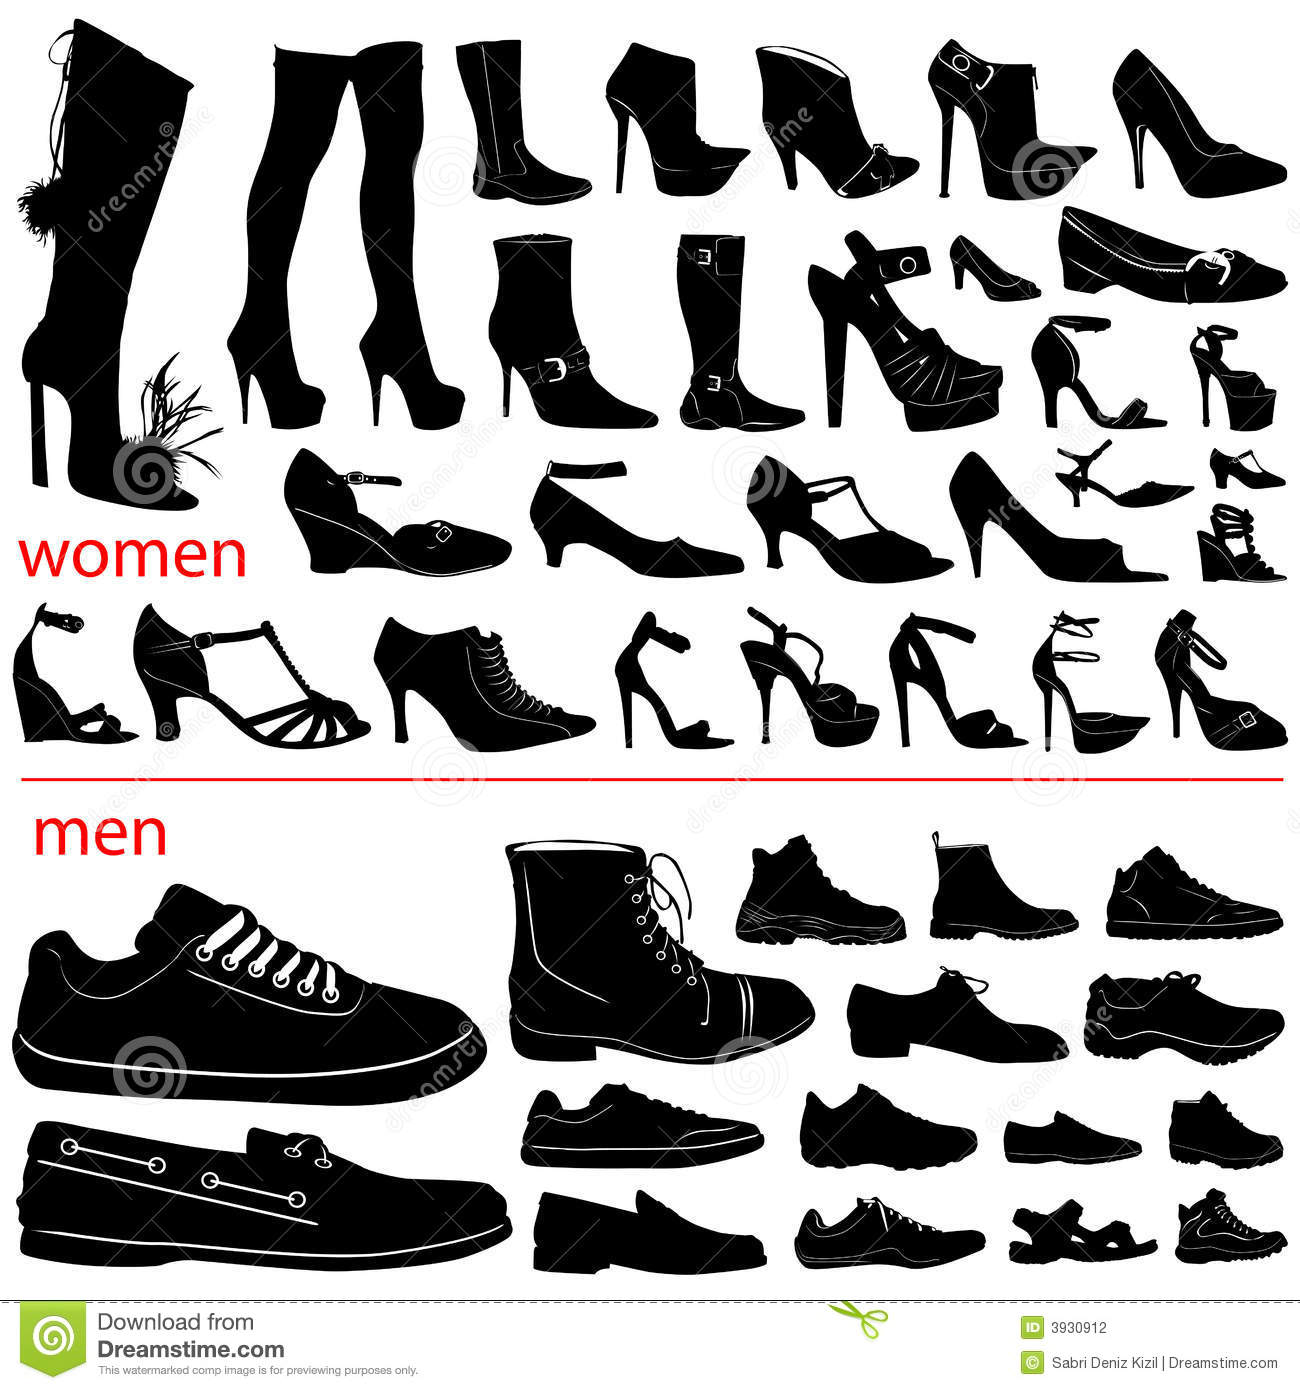 Men and Women Shoes